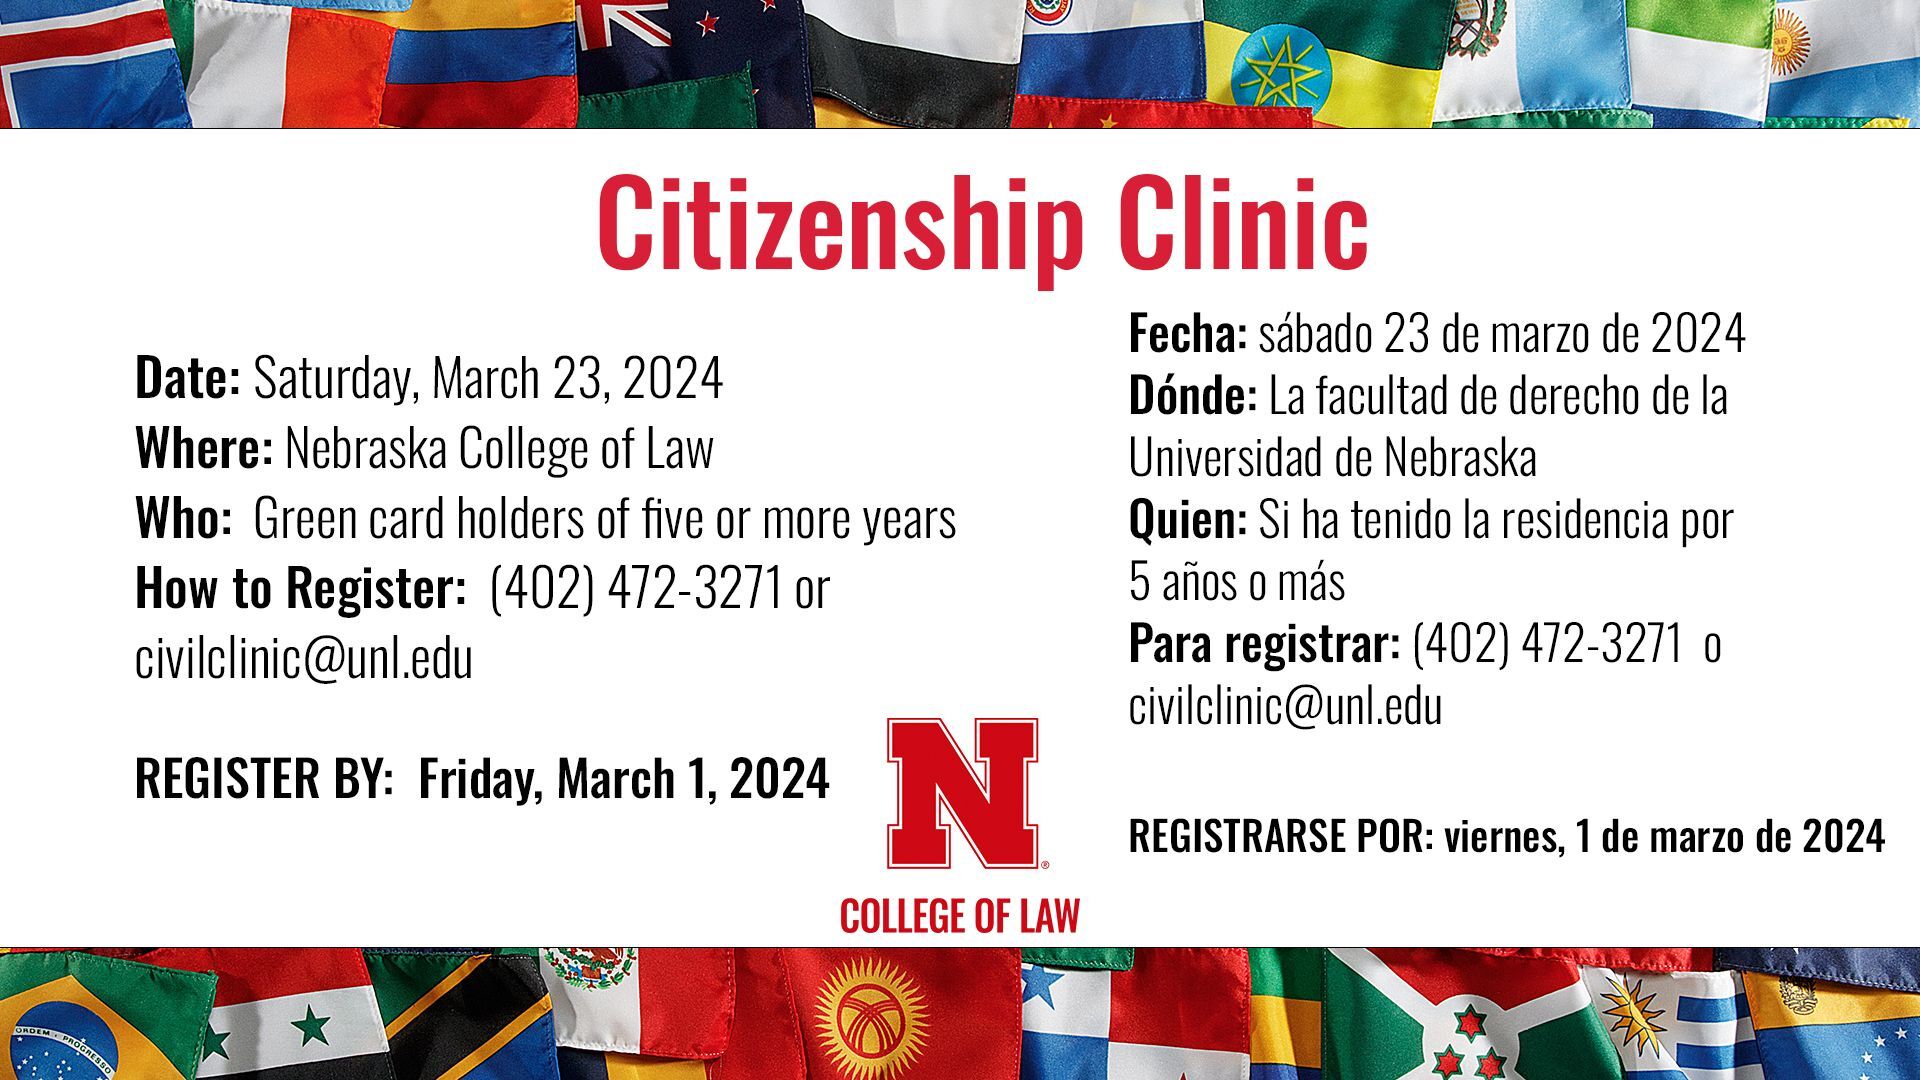 Register By: Friday, March 1, 2024